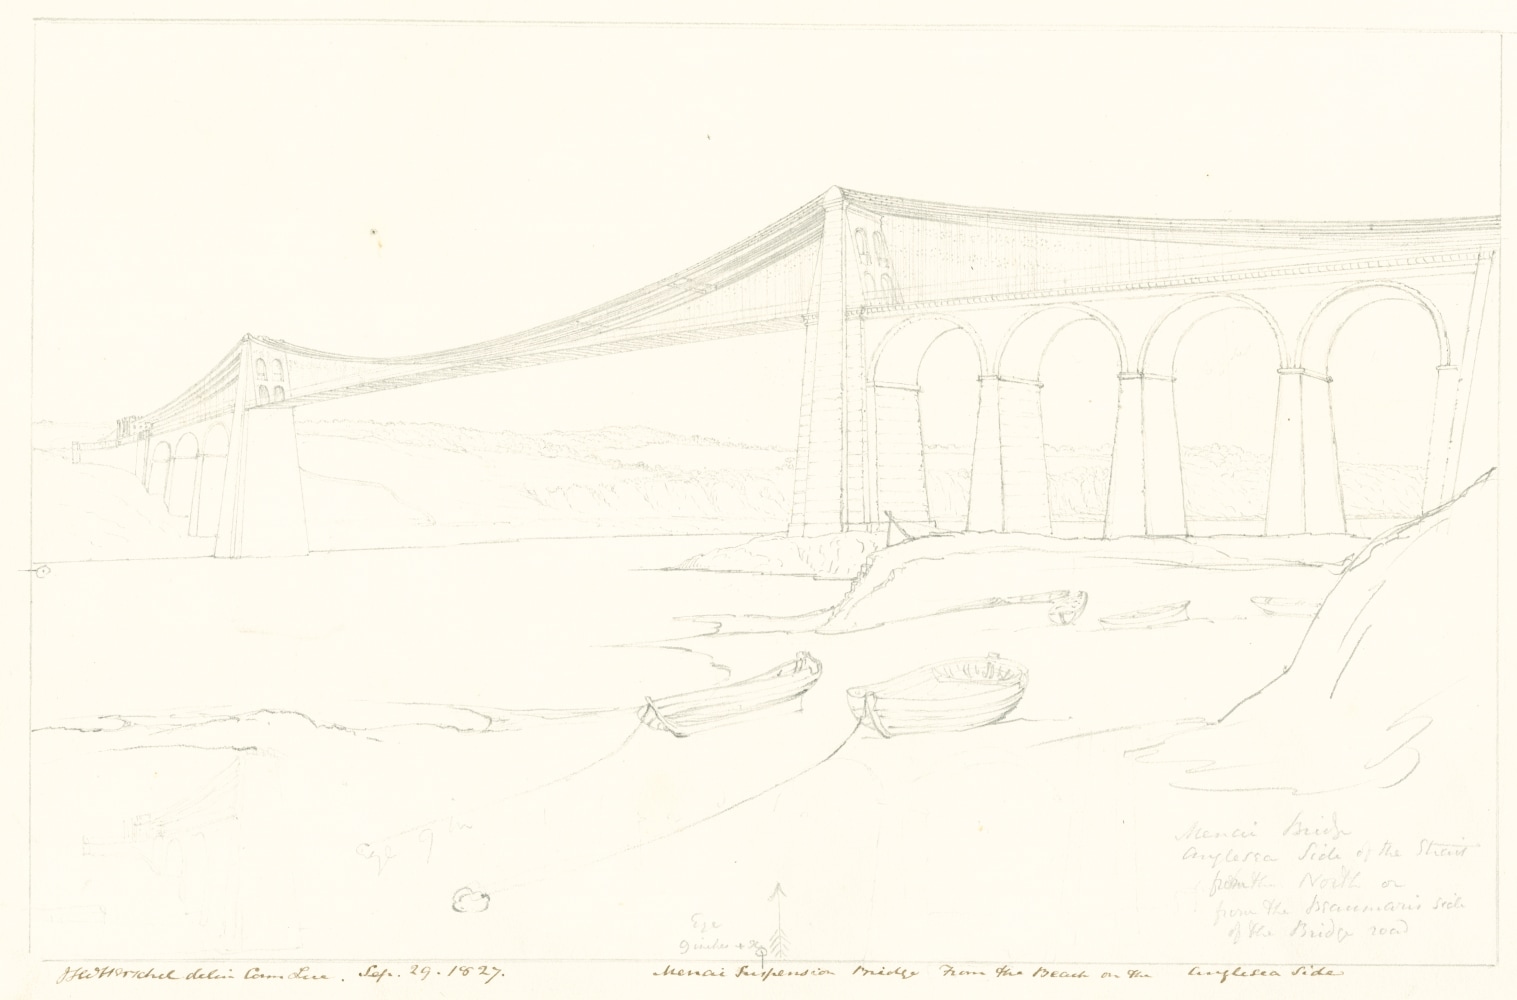 Sir John Frederick William HERSCHEL (English, 1792-1872) &quot;No 566 Menai Suspension Bridge From the Beach on the Anglesea Side”, 29 September 1827 Camera lucida drawing, pencil on paper 19.9 x 30.9 cm on 24.3 x 37.7 cm paper Watermark “J Whatman Turkey Mill”. Numbered, signed, dated and titled “No 566 / JFW Herschel delin Cam. / Luc. Sep 29, 1827. / Menai Suspension Bridge From the Beach on the Anglesea Side” in ink in border, and “Eye 9 inches = x. / Menai Bridge / Anglesea Side of the Strait / from the North or from the Beaumaris side of / the bridge road” in pencil. Inscribed &quot;Menai Bridge / [illegible] from Anglesea side&quot; in pencil on verso.